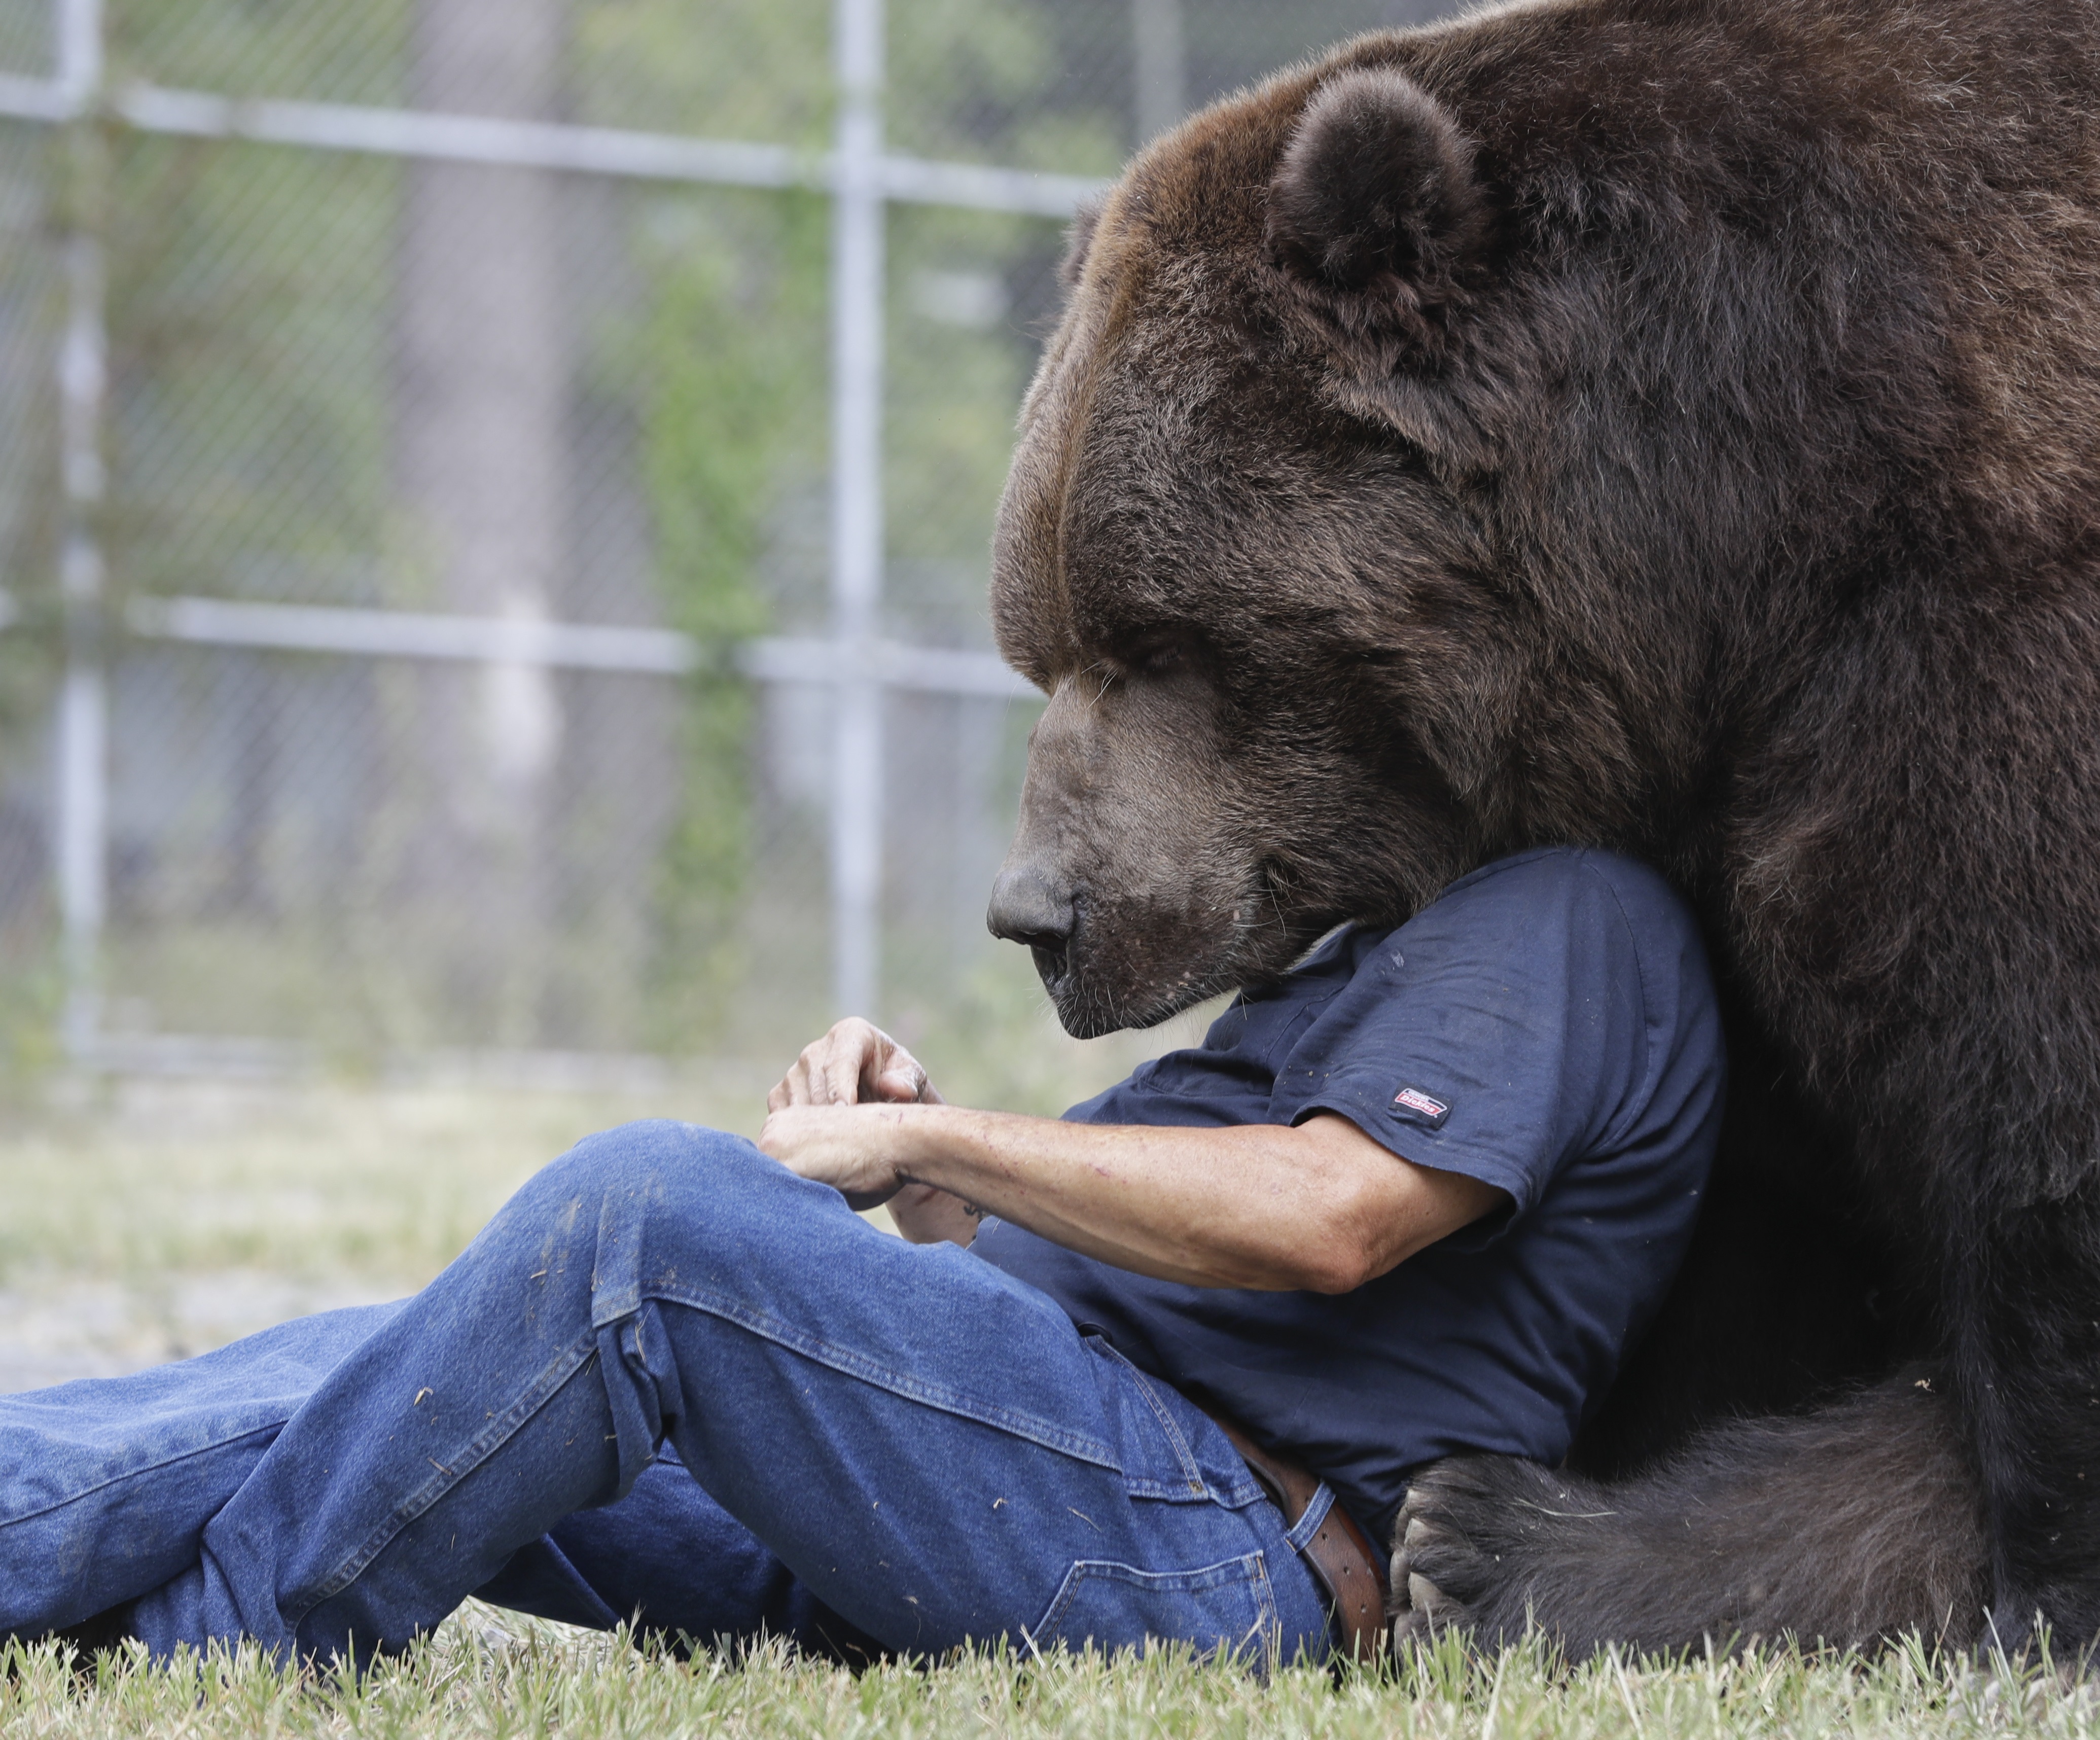 In this Wednesday, Sept. 7, 2016 photo, Jim Kowalczik plays with Jimbo, a 1500-pound Kodiak bear, at the Orphaned Wildlife Center in Otisville, N.Y. (AP Photo/Mike Groll)